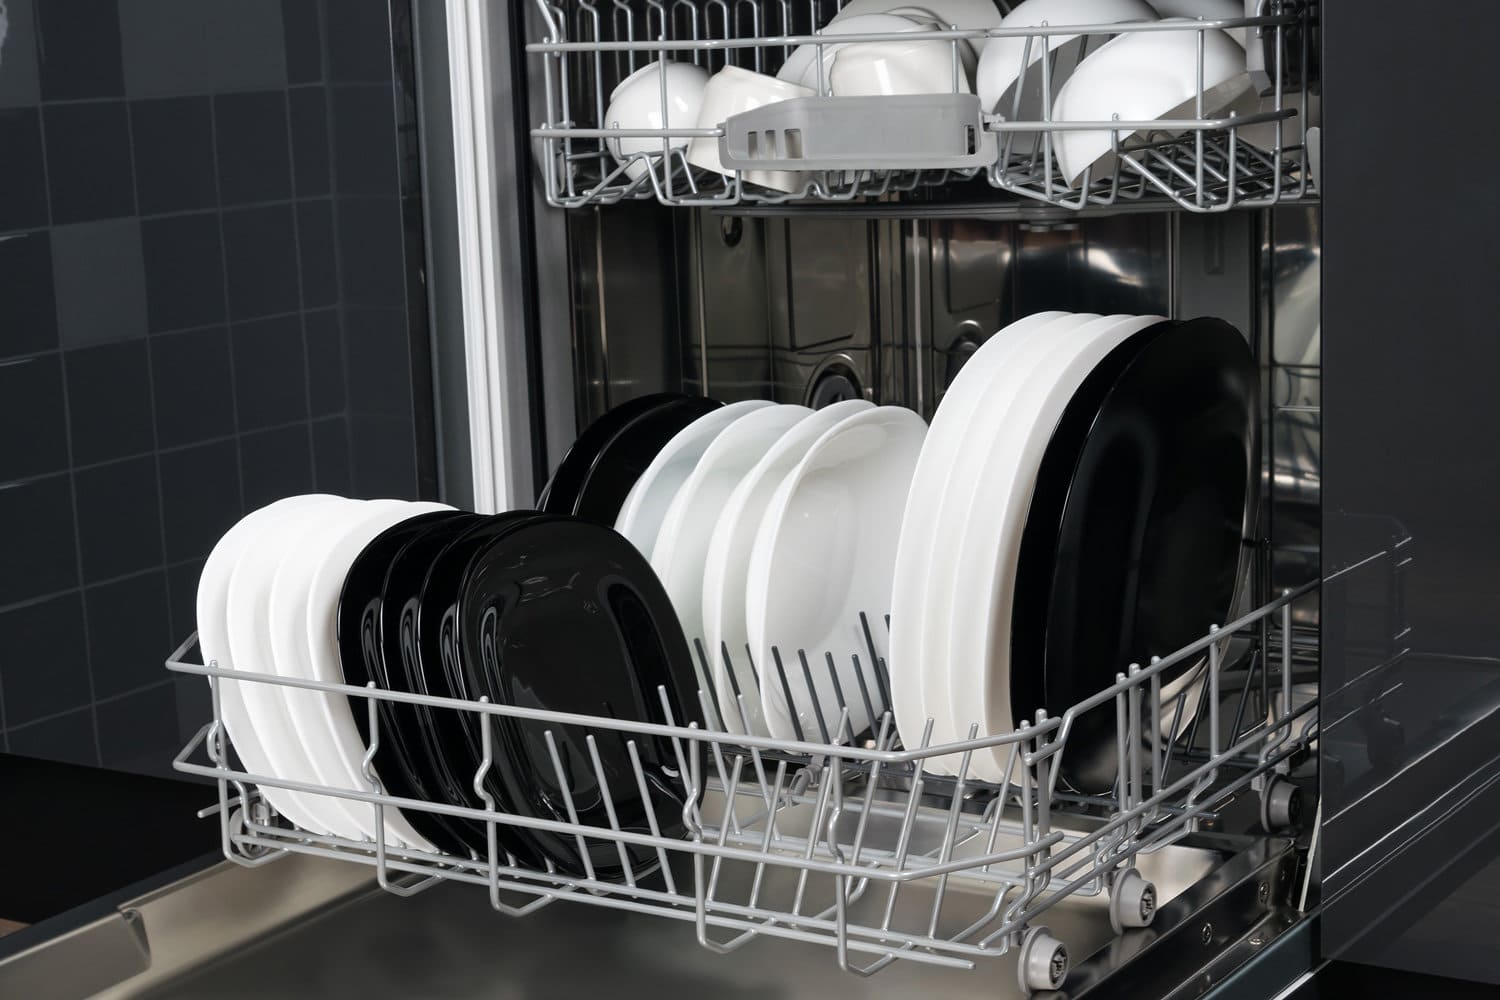 black and white plates in the dishwasher compartment, close-up